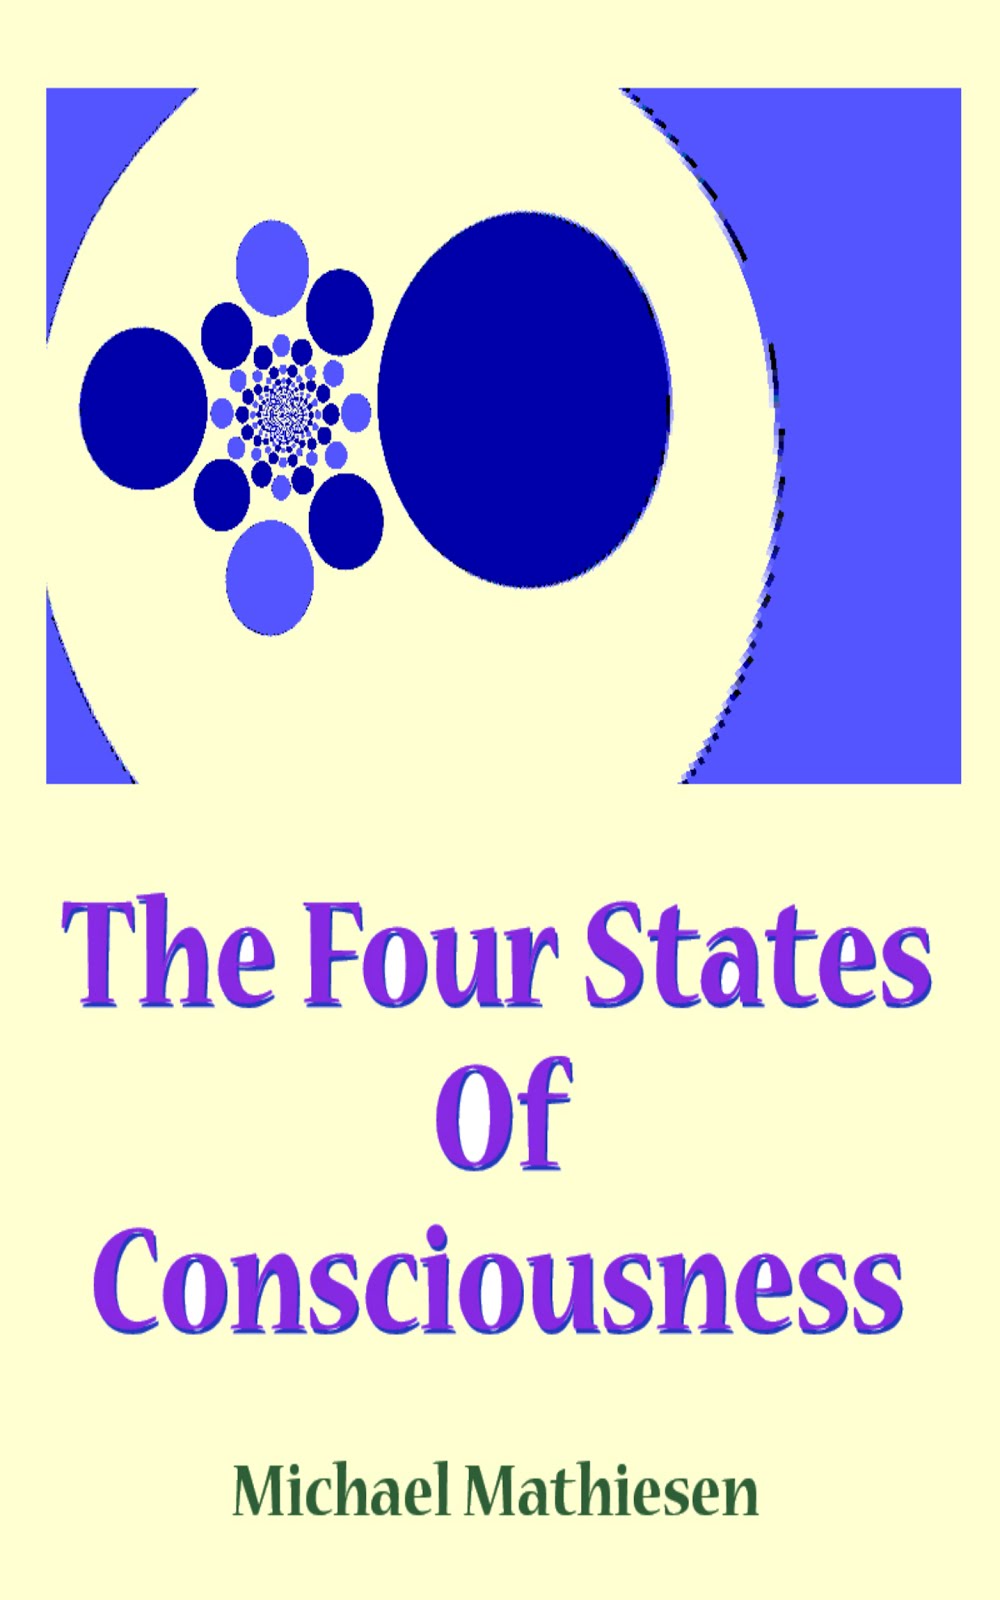 What is Consciousness